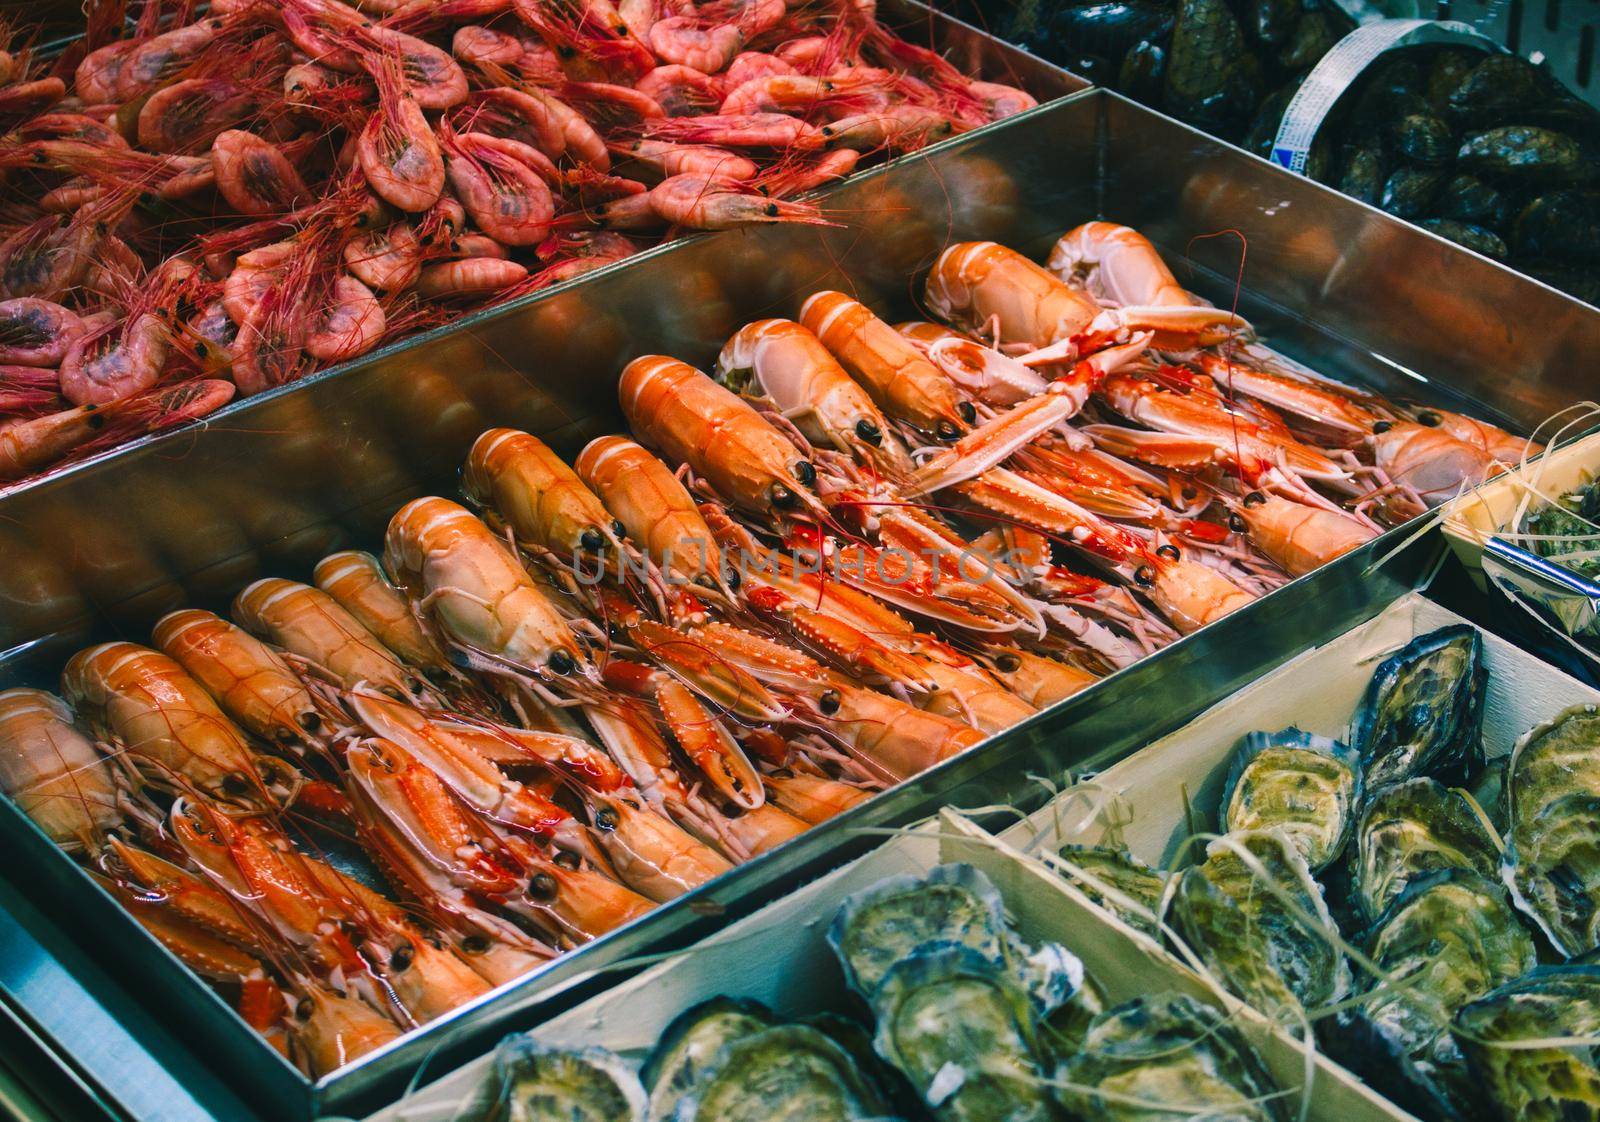 Tray of fresh langoustines at a seafood counter in a supermarket